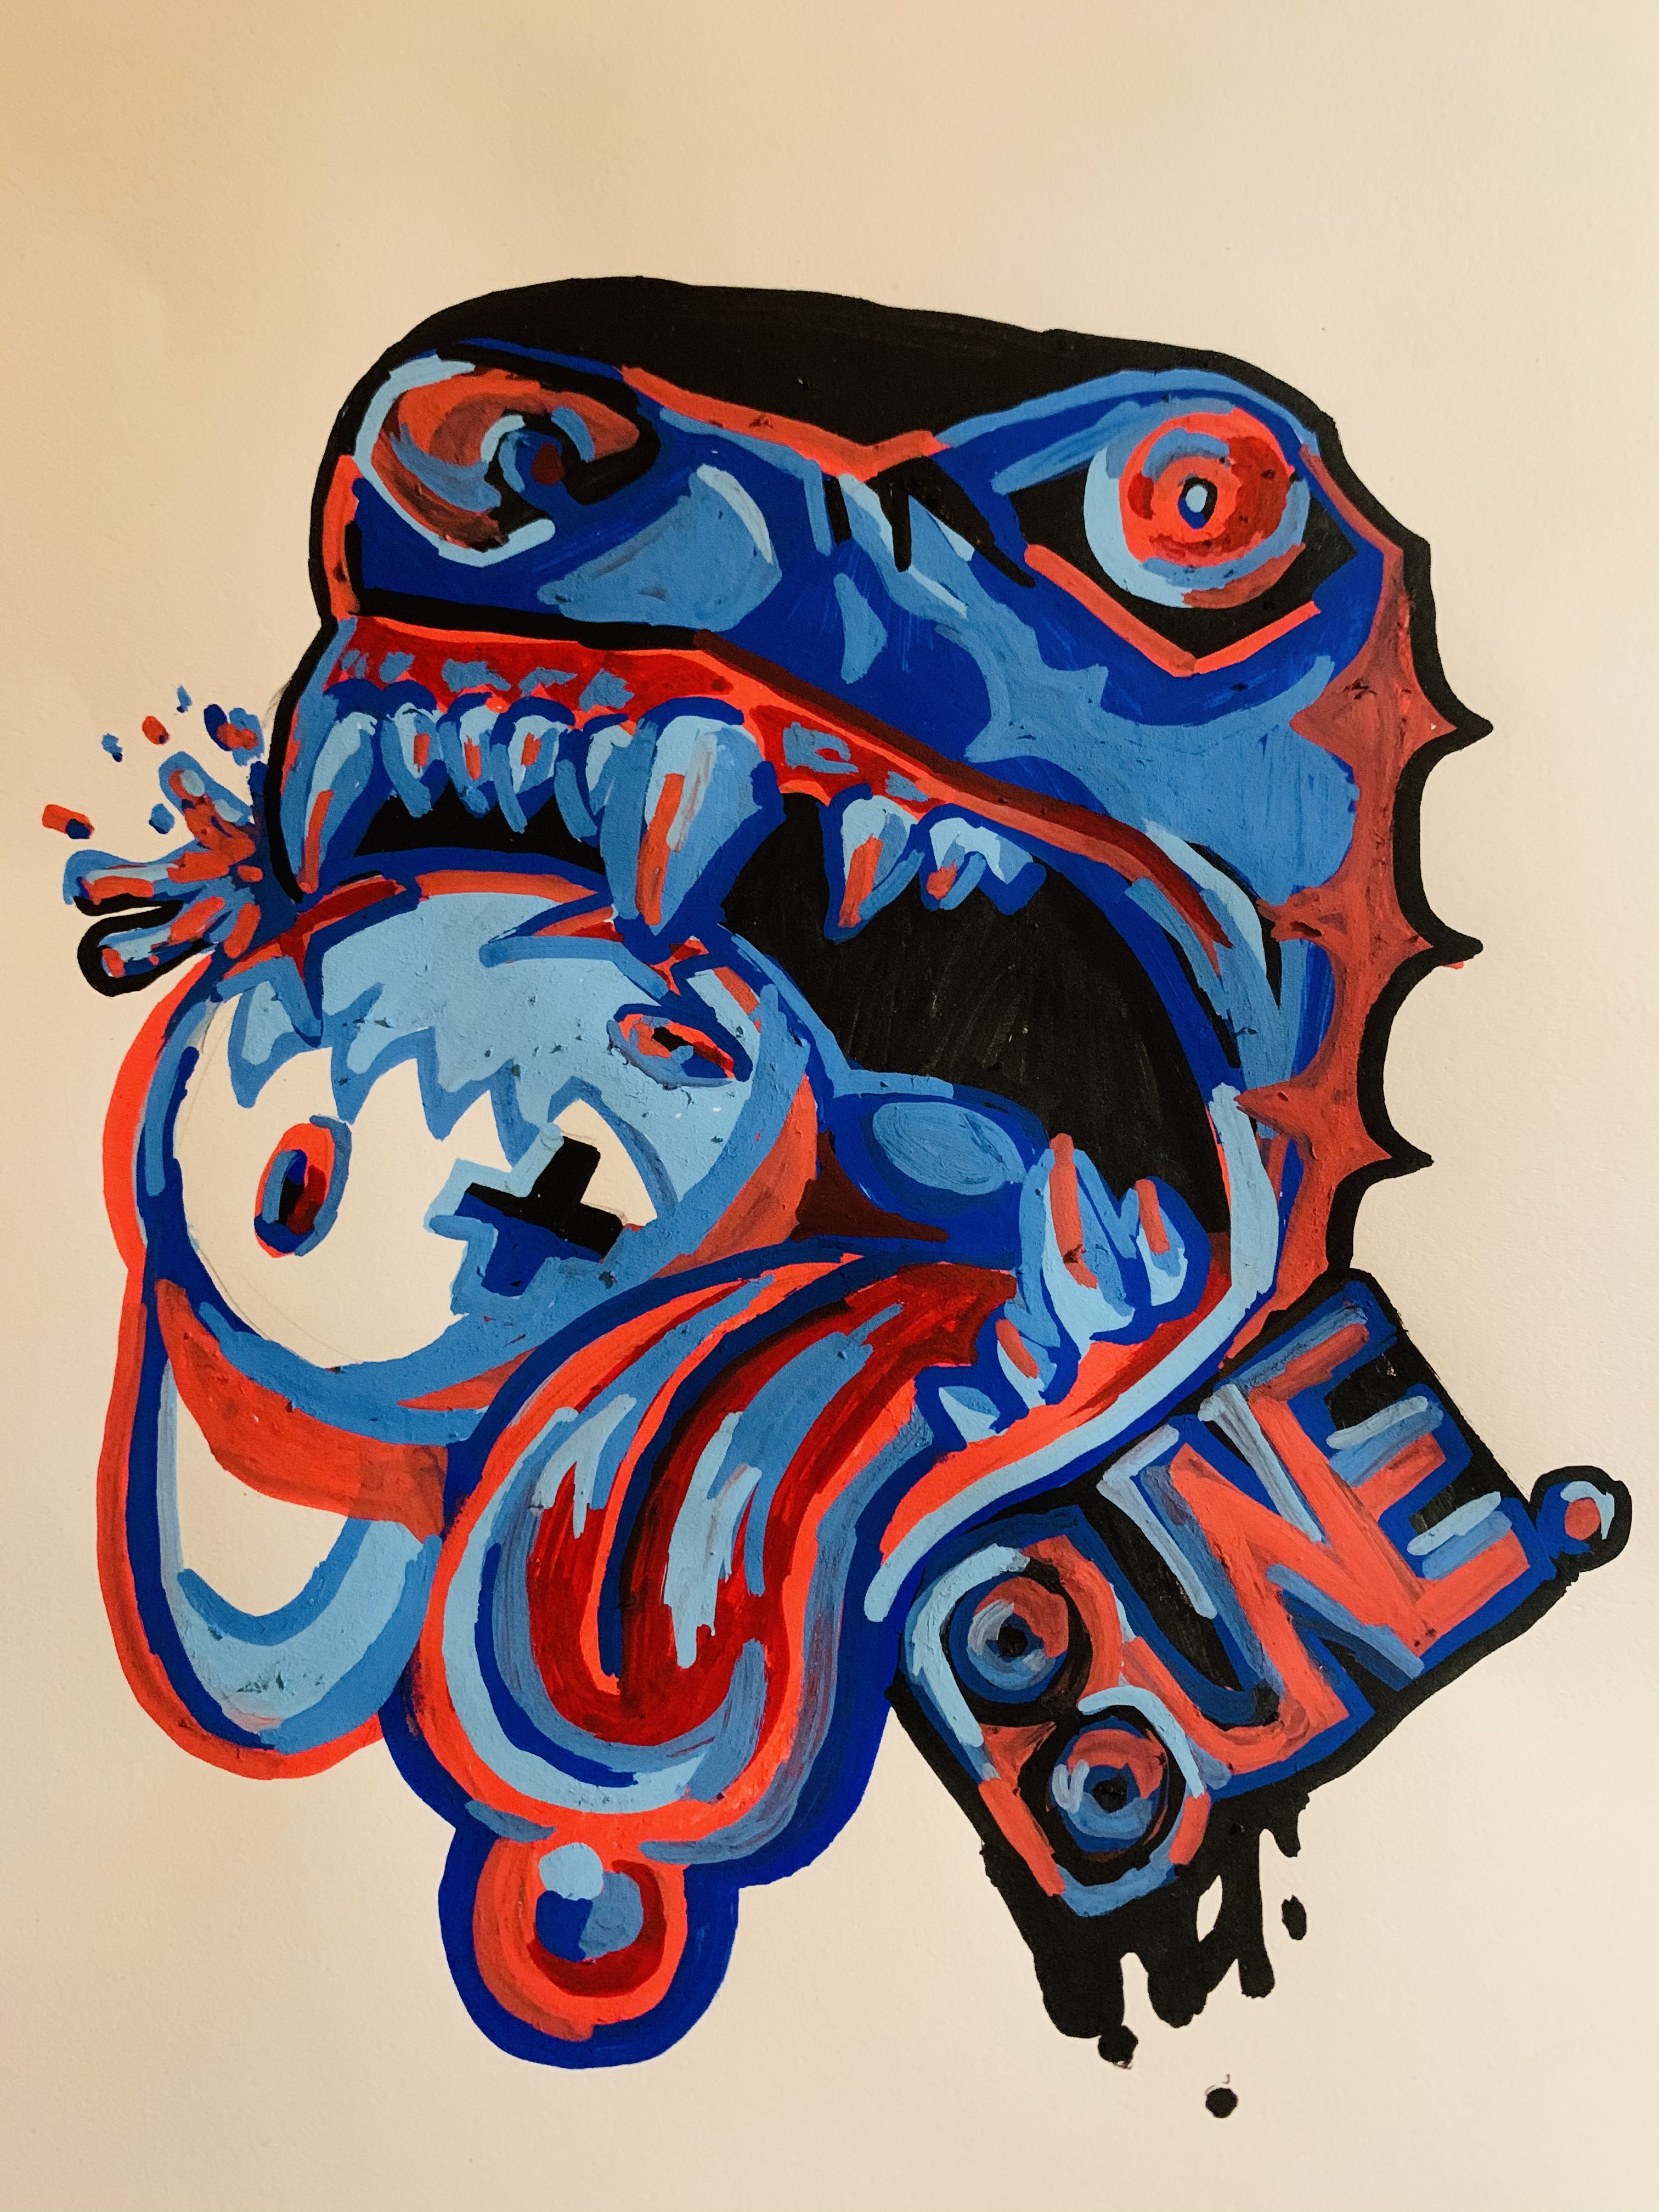 A red and blue painting done with paint pens, done in 2020.